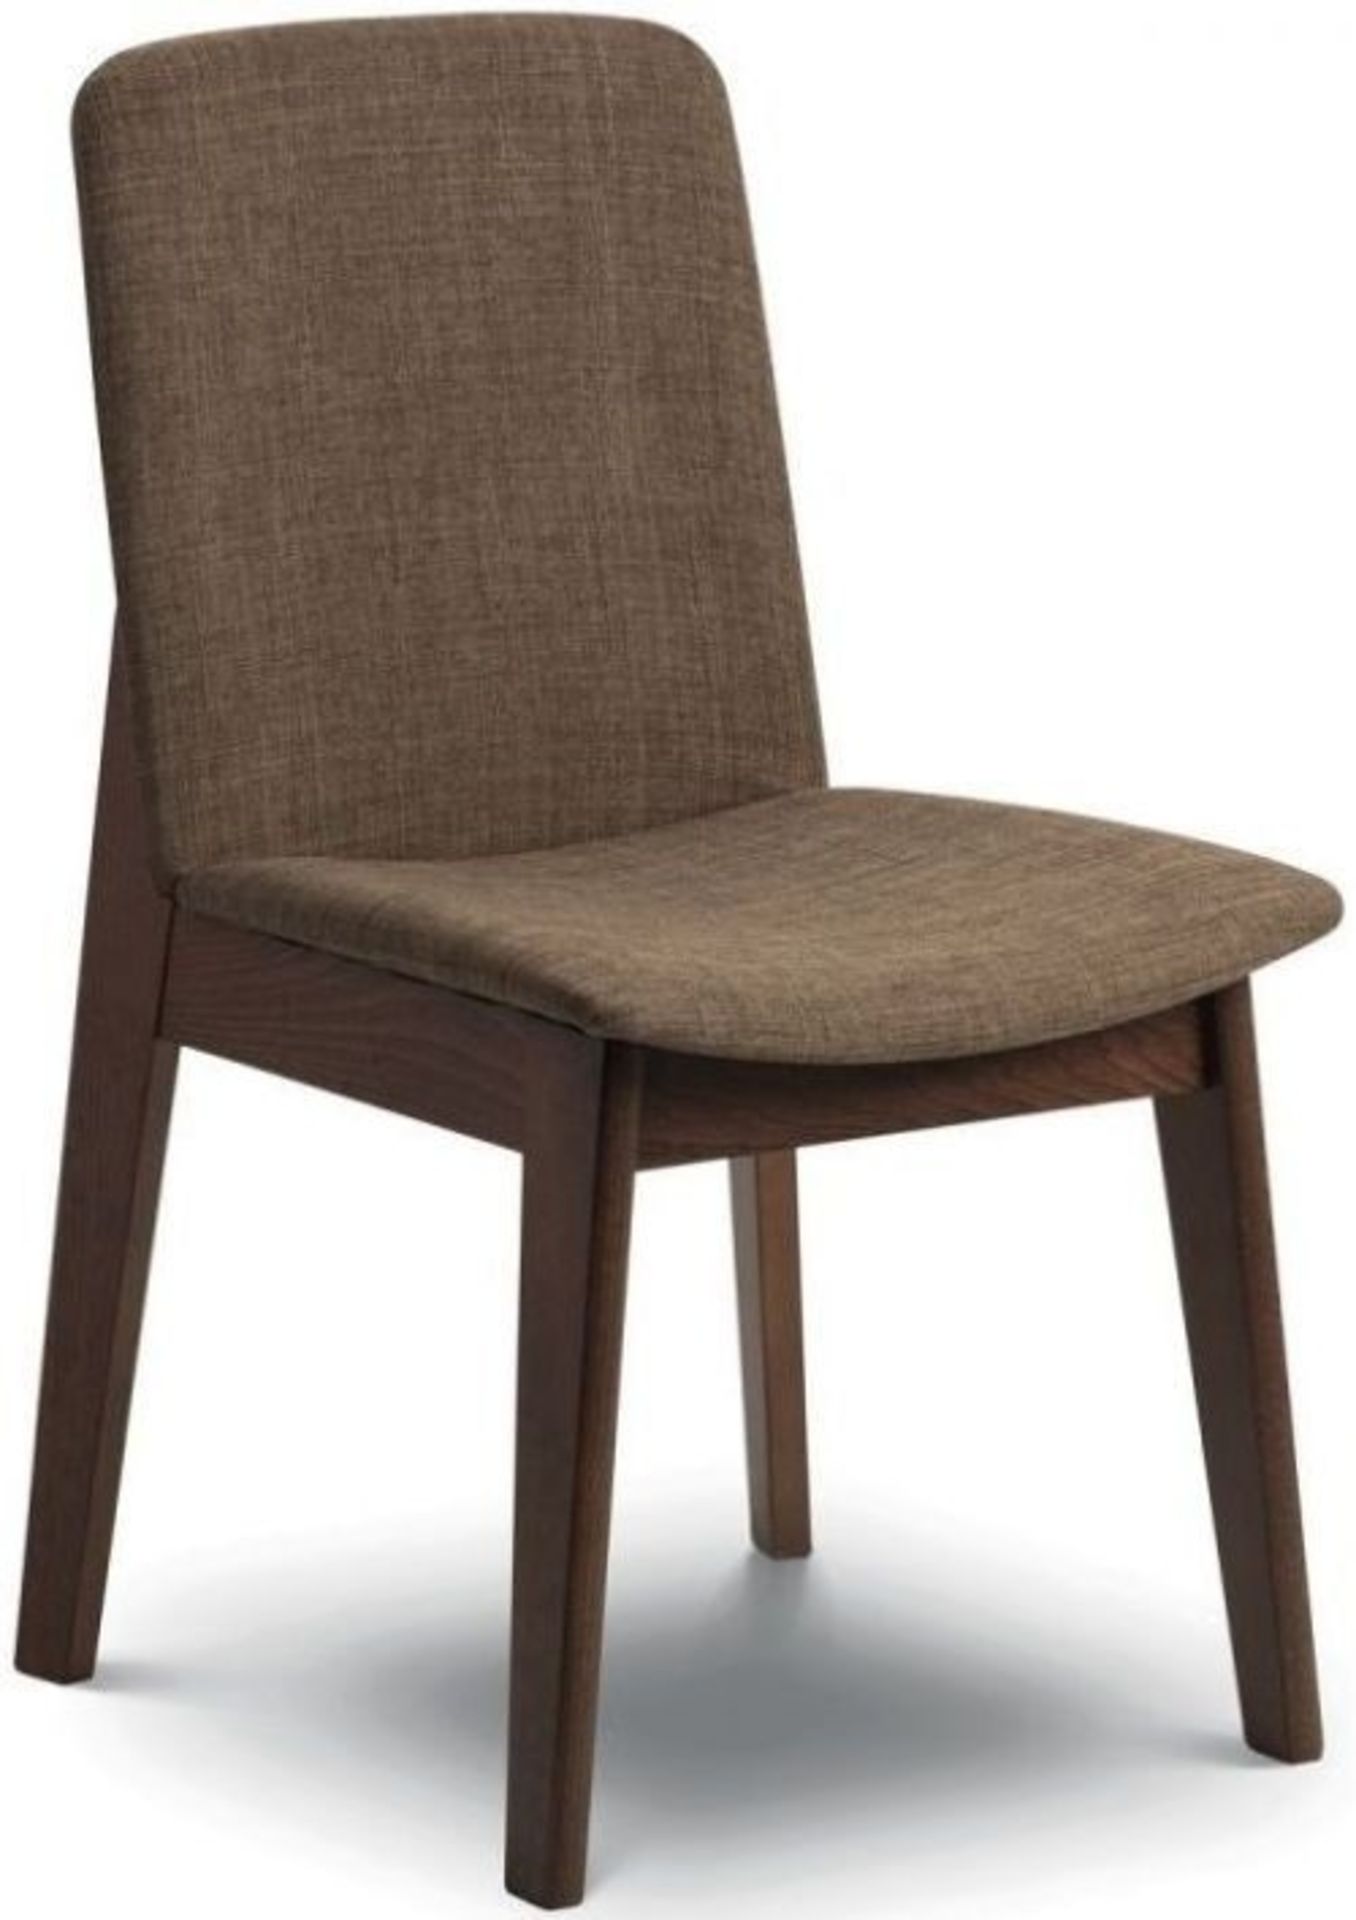 4 x Julian Bowen Walnut and Cappuccino Dining Chairs - New Boxed Stock - Solid Beech With Walnut